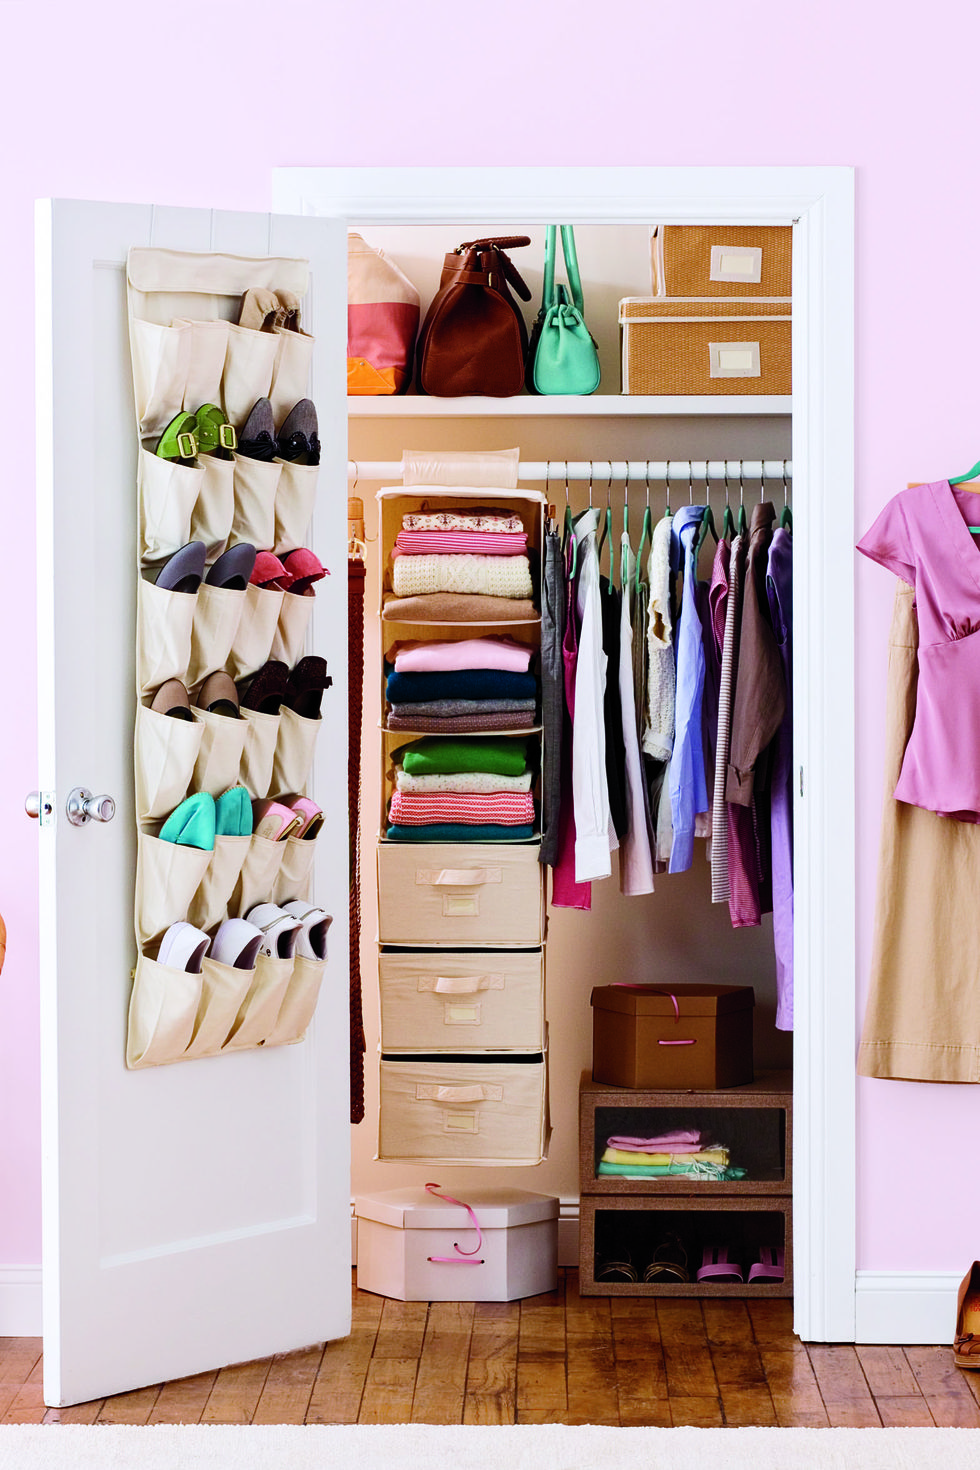 35 Best Closet Organization Ideas for a Functional Space